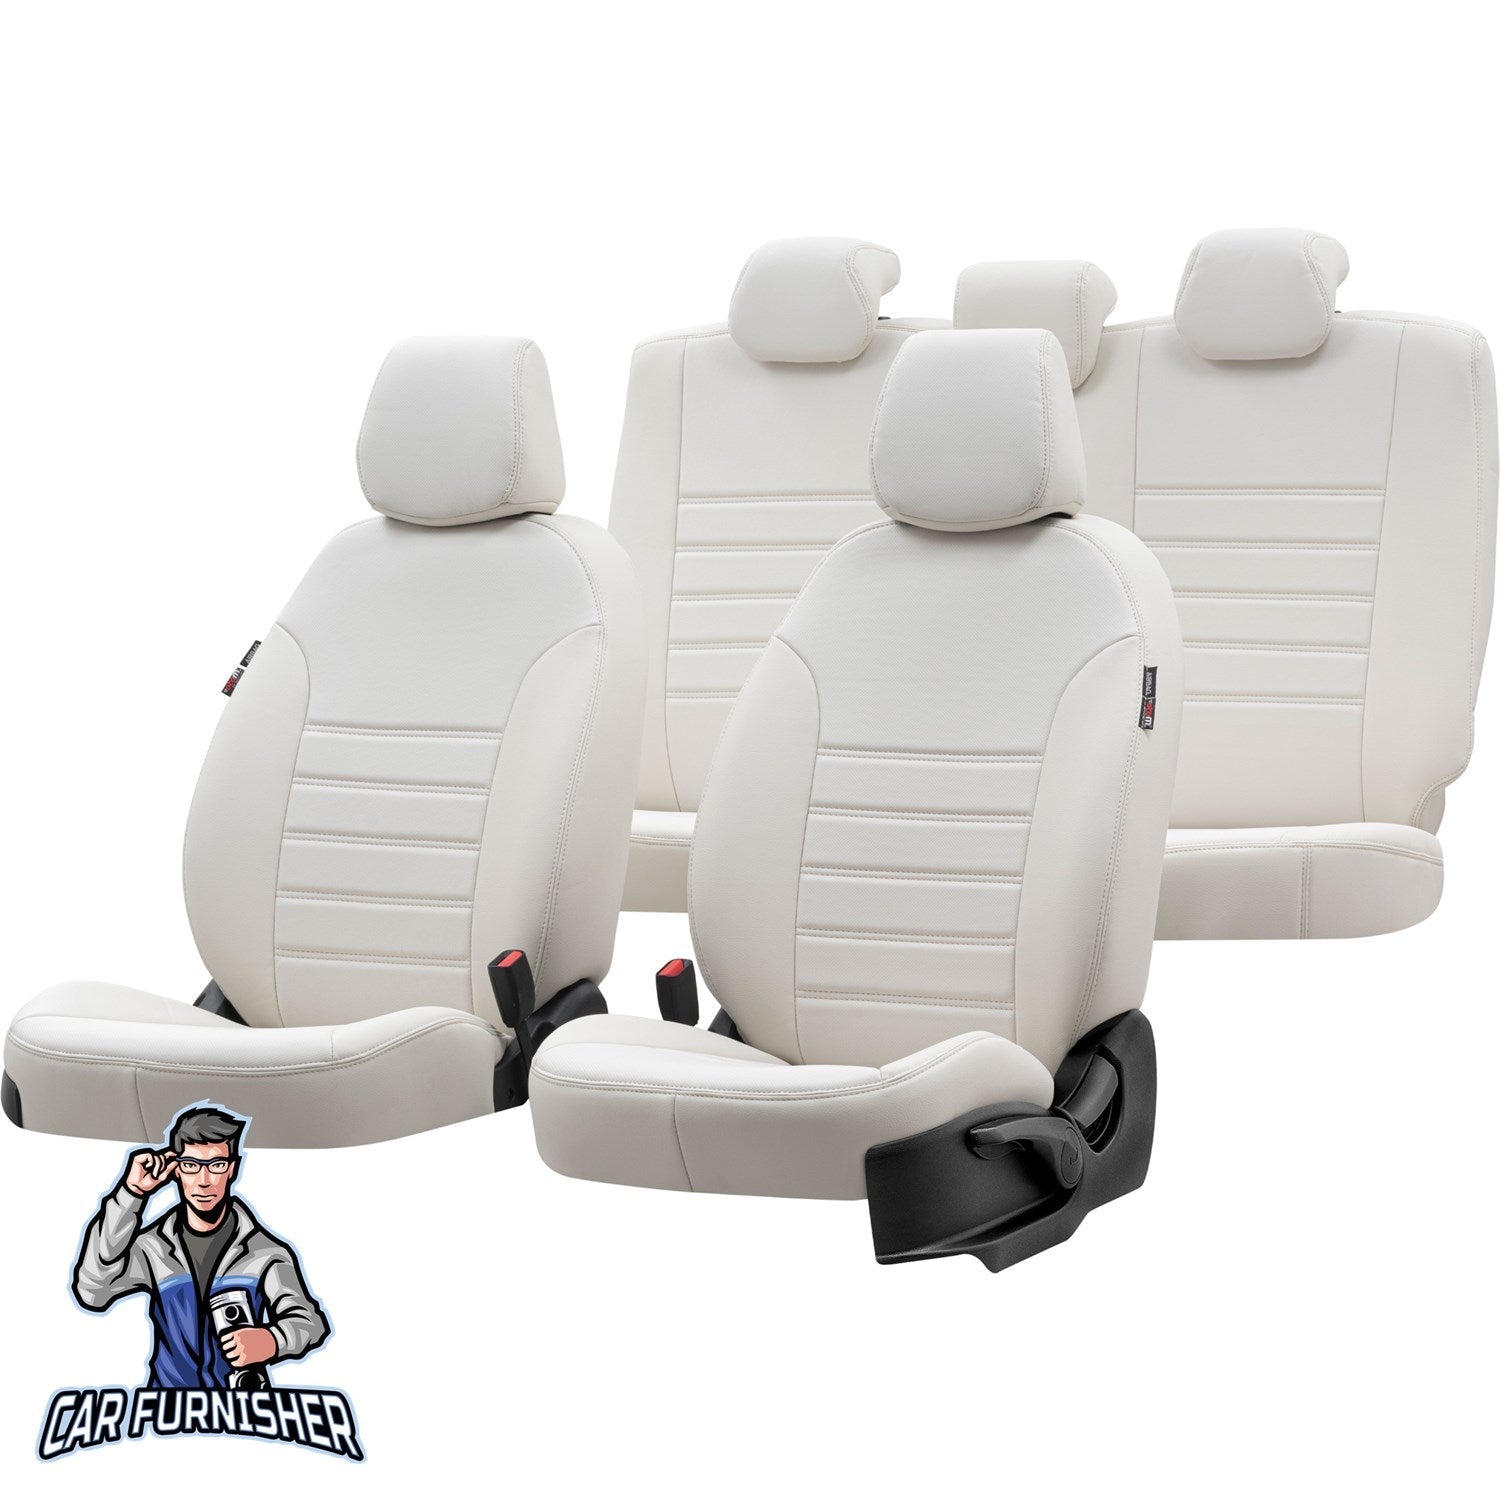 Kia Opirus Seat Covers Istanbul Leather Design Ivory Leather